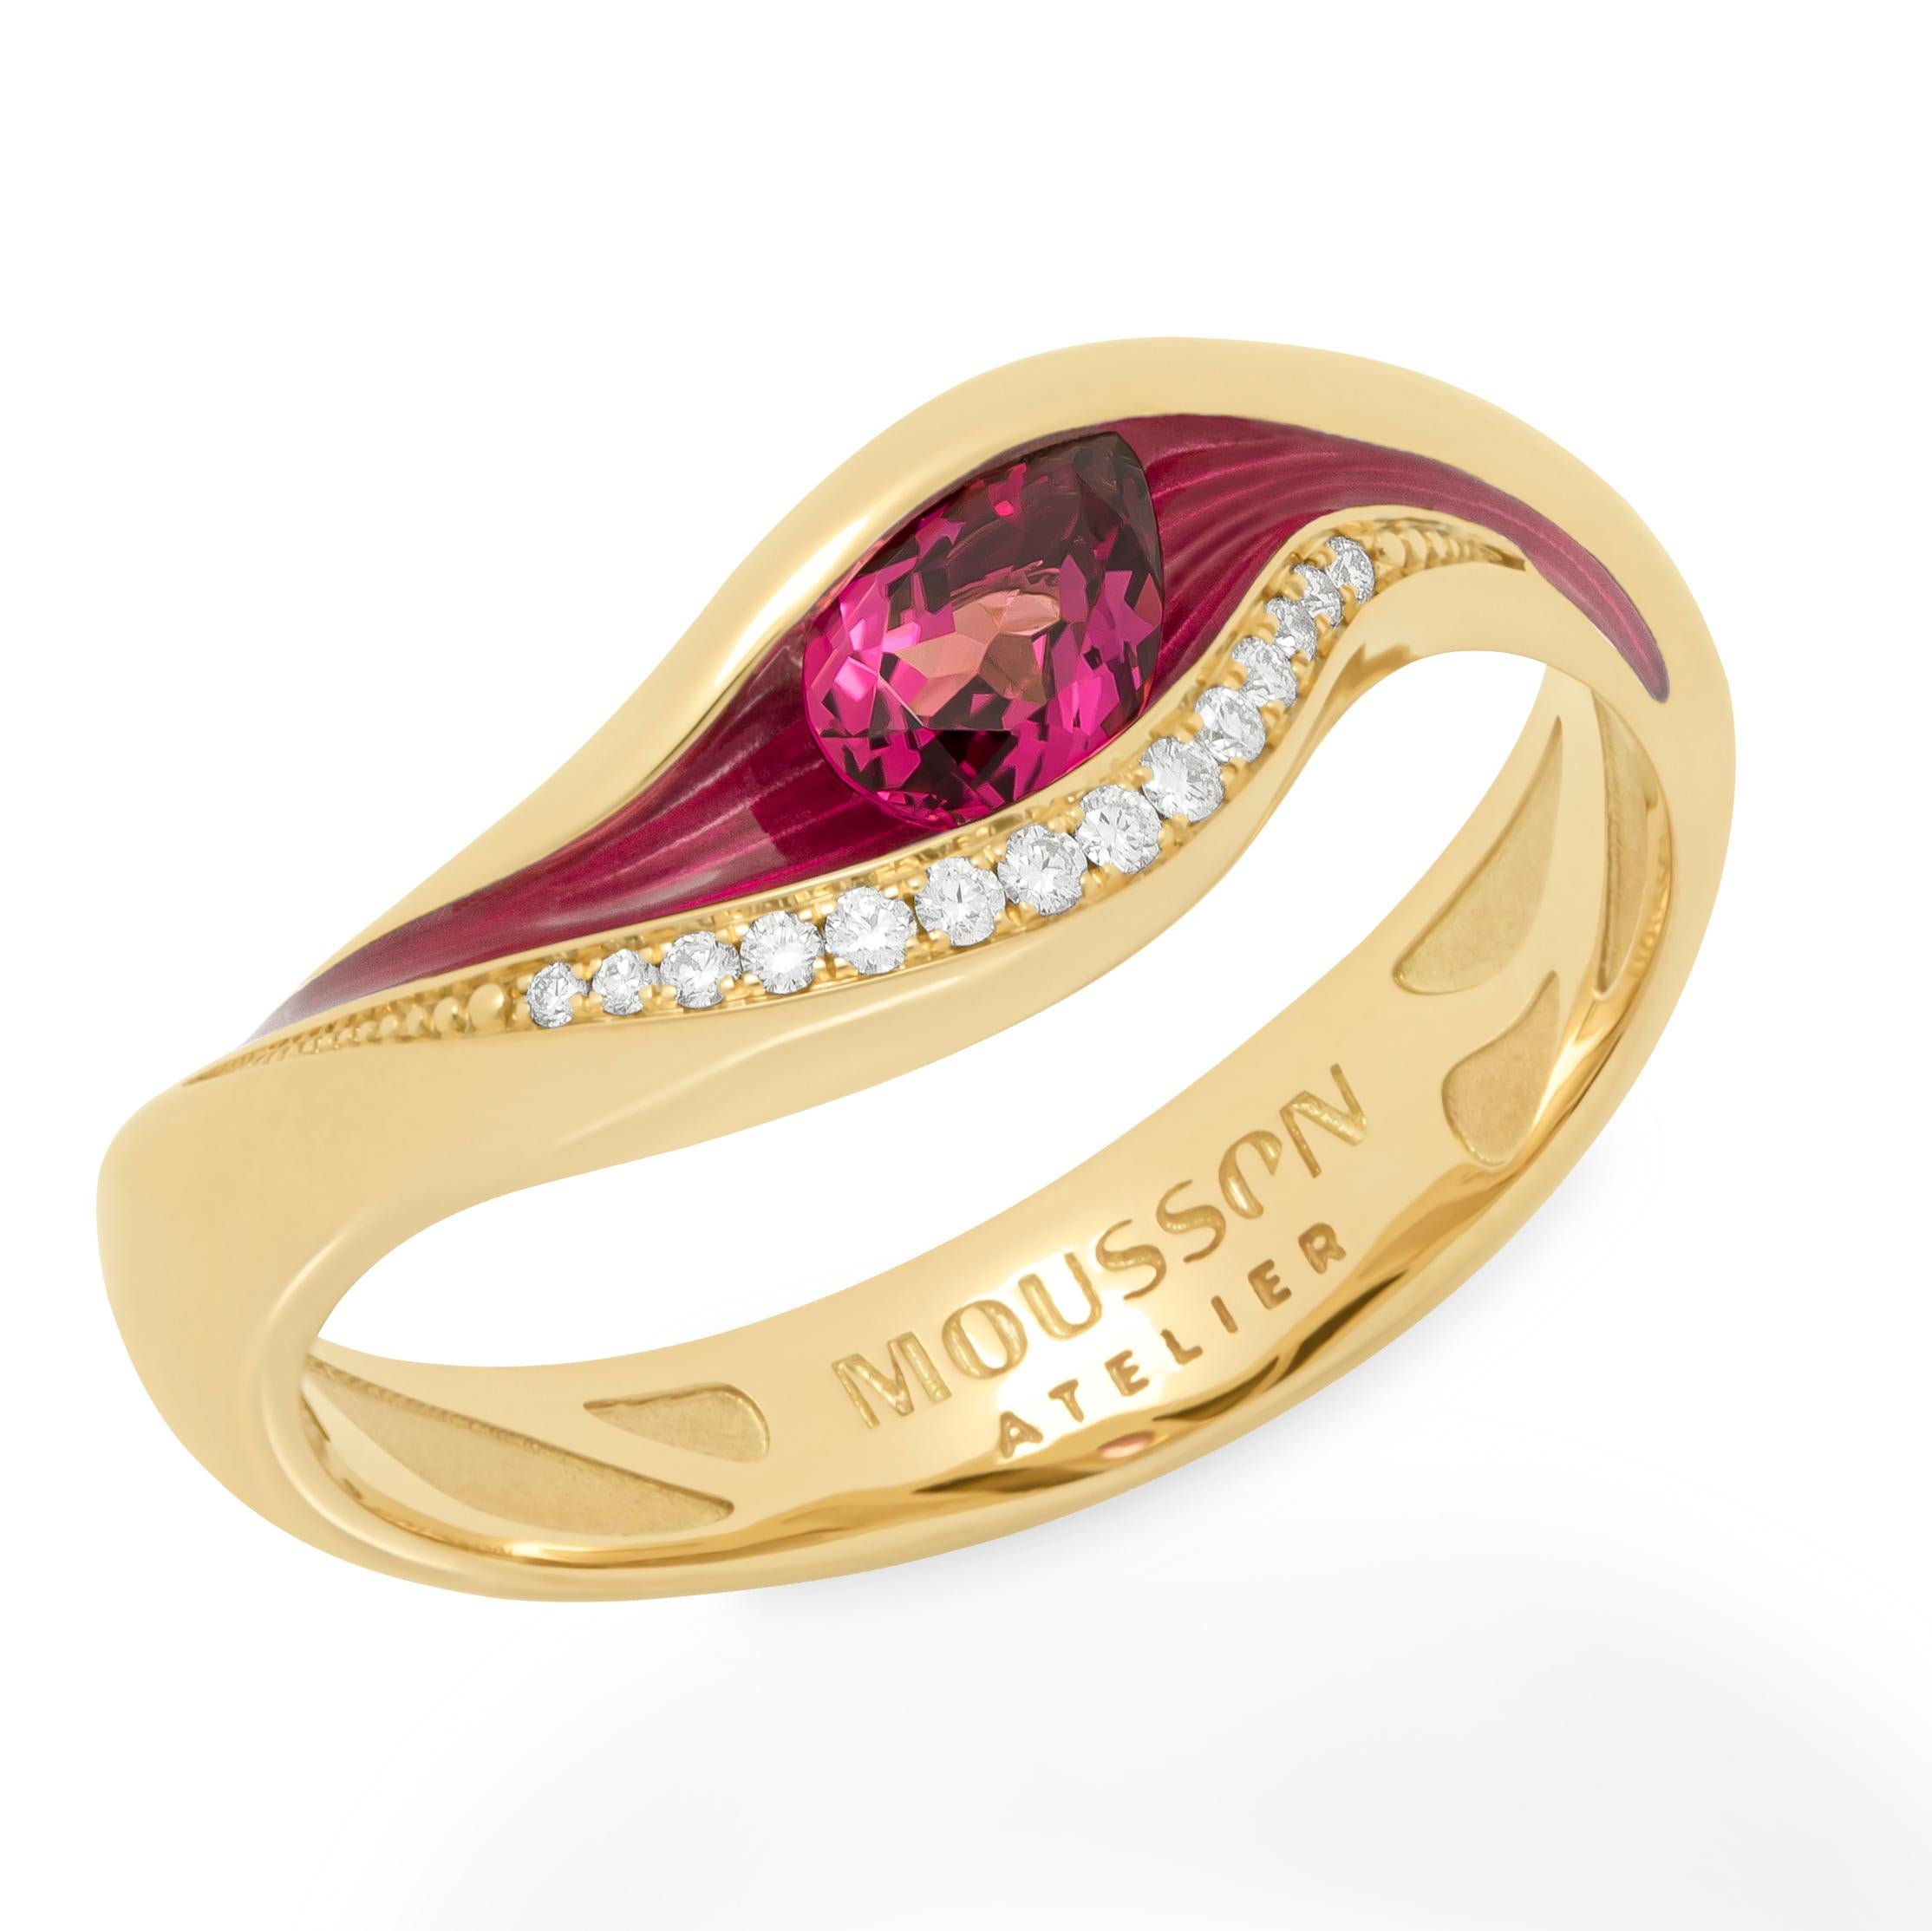 Pink Tourmaline Diamonds Enamel 18 Karat Yellow Gold Melted Colors Ring
Our new collection 